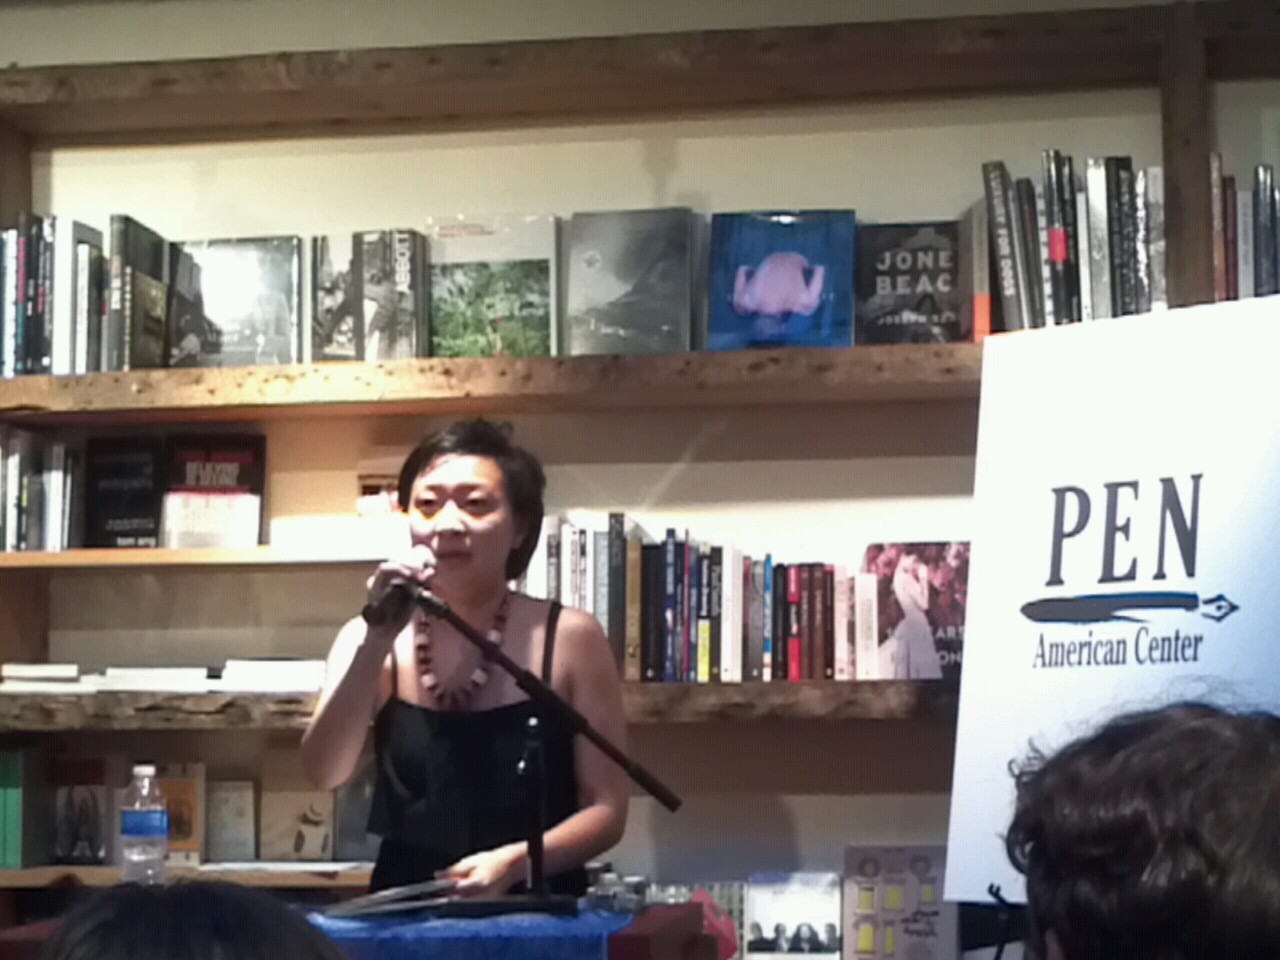 penlive:
“ Cathy Park Hong reads at Bookcourt during the Brooklyn Litcrawl. Hong was an impressive performer at the height of her craft.
”